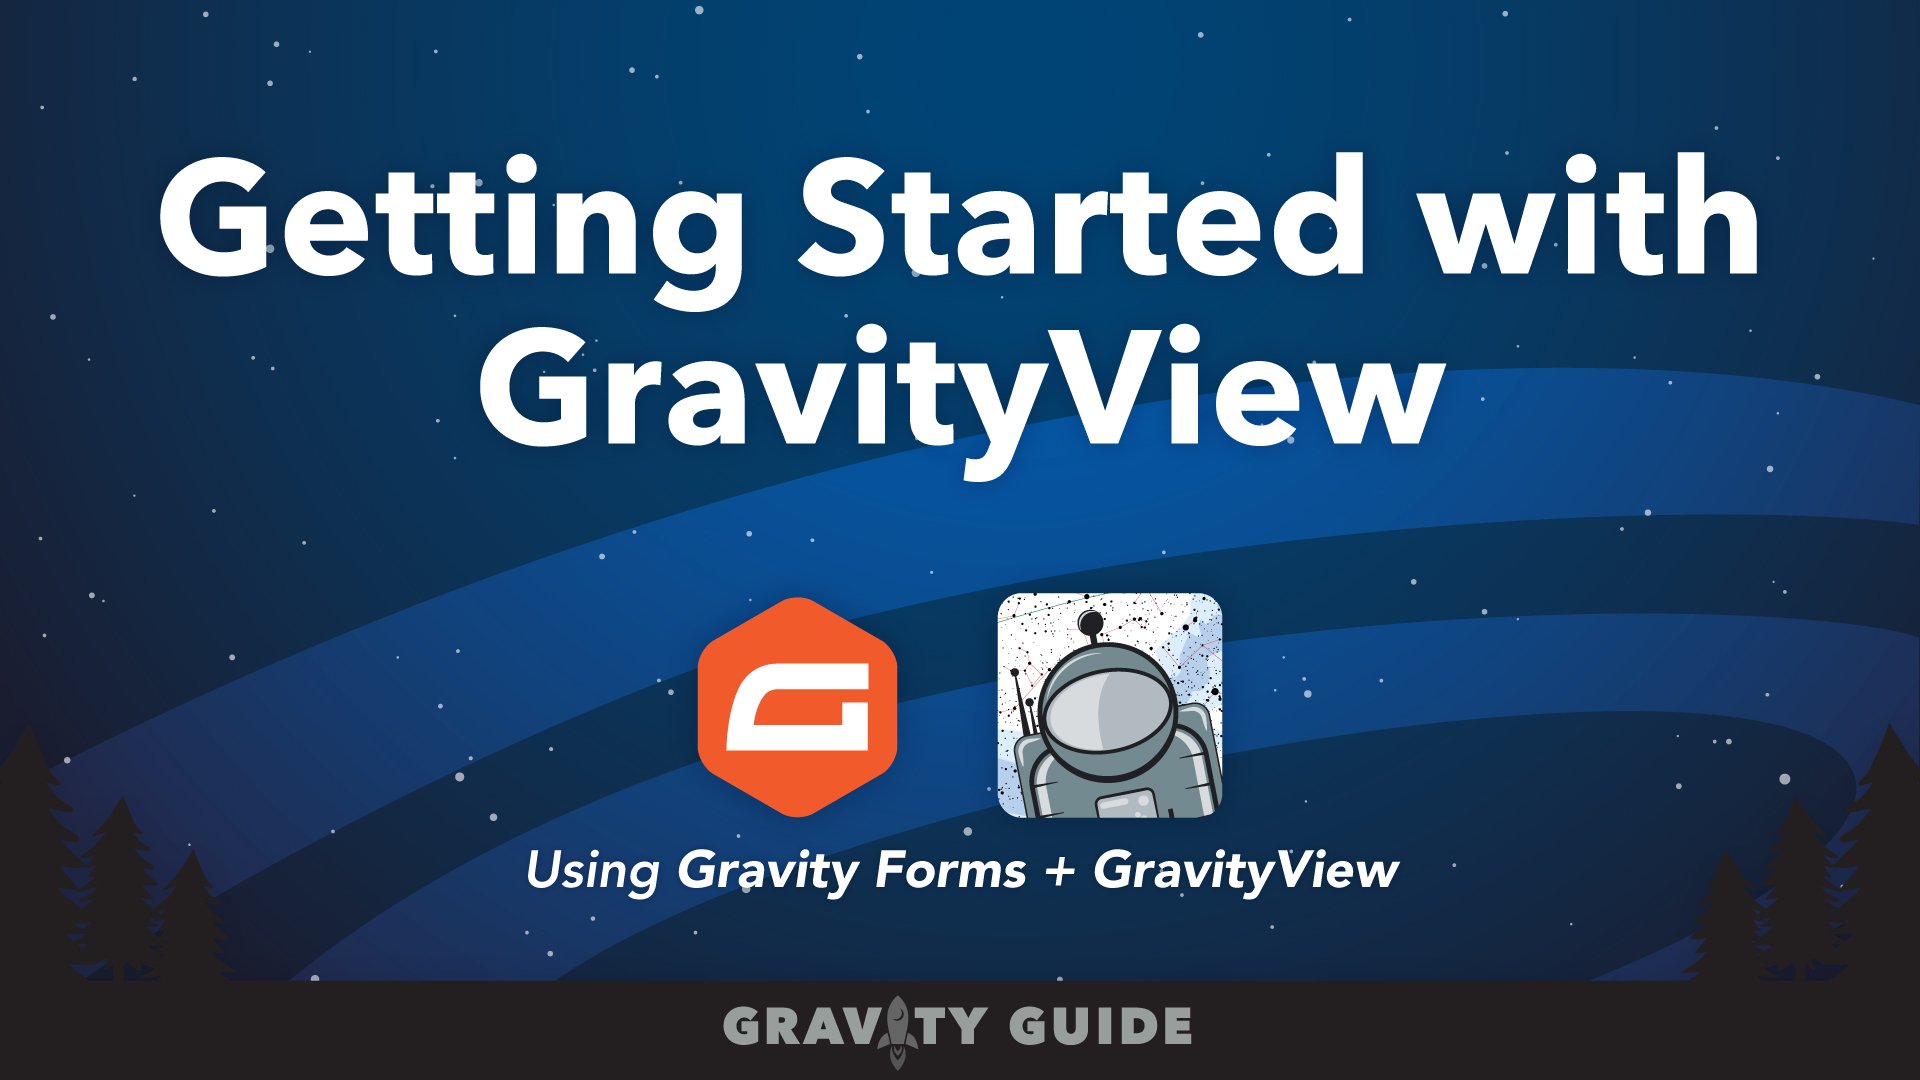 Getting Started with GravityView